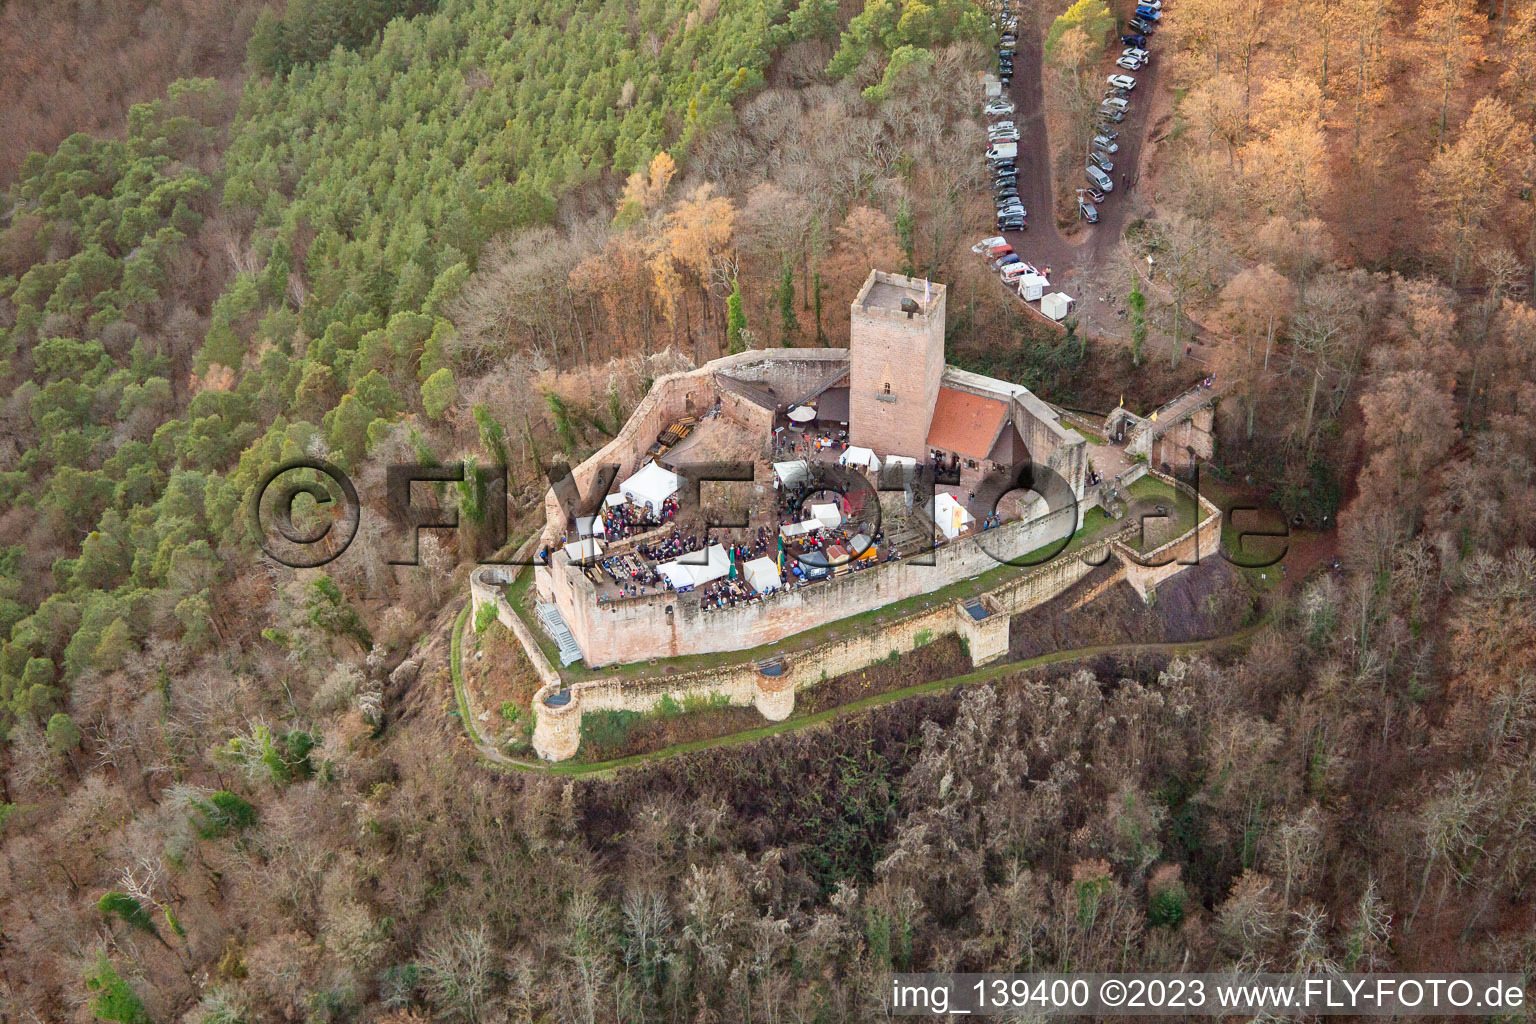 Christmas market at the Landeck castle ruins in Klingenmünster in the state Rhineland-Palatinate, Germany seen from above